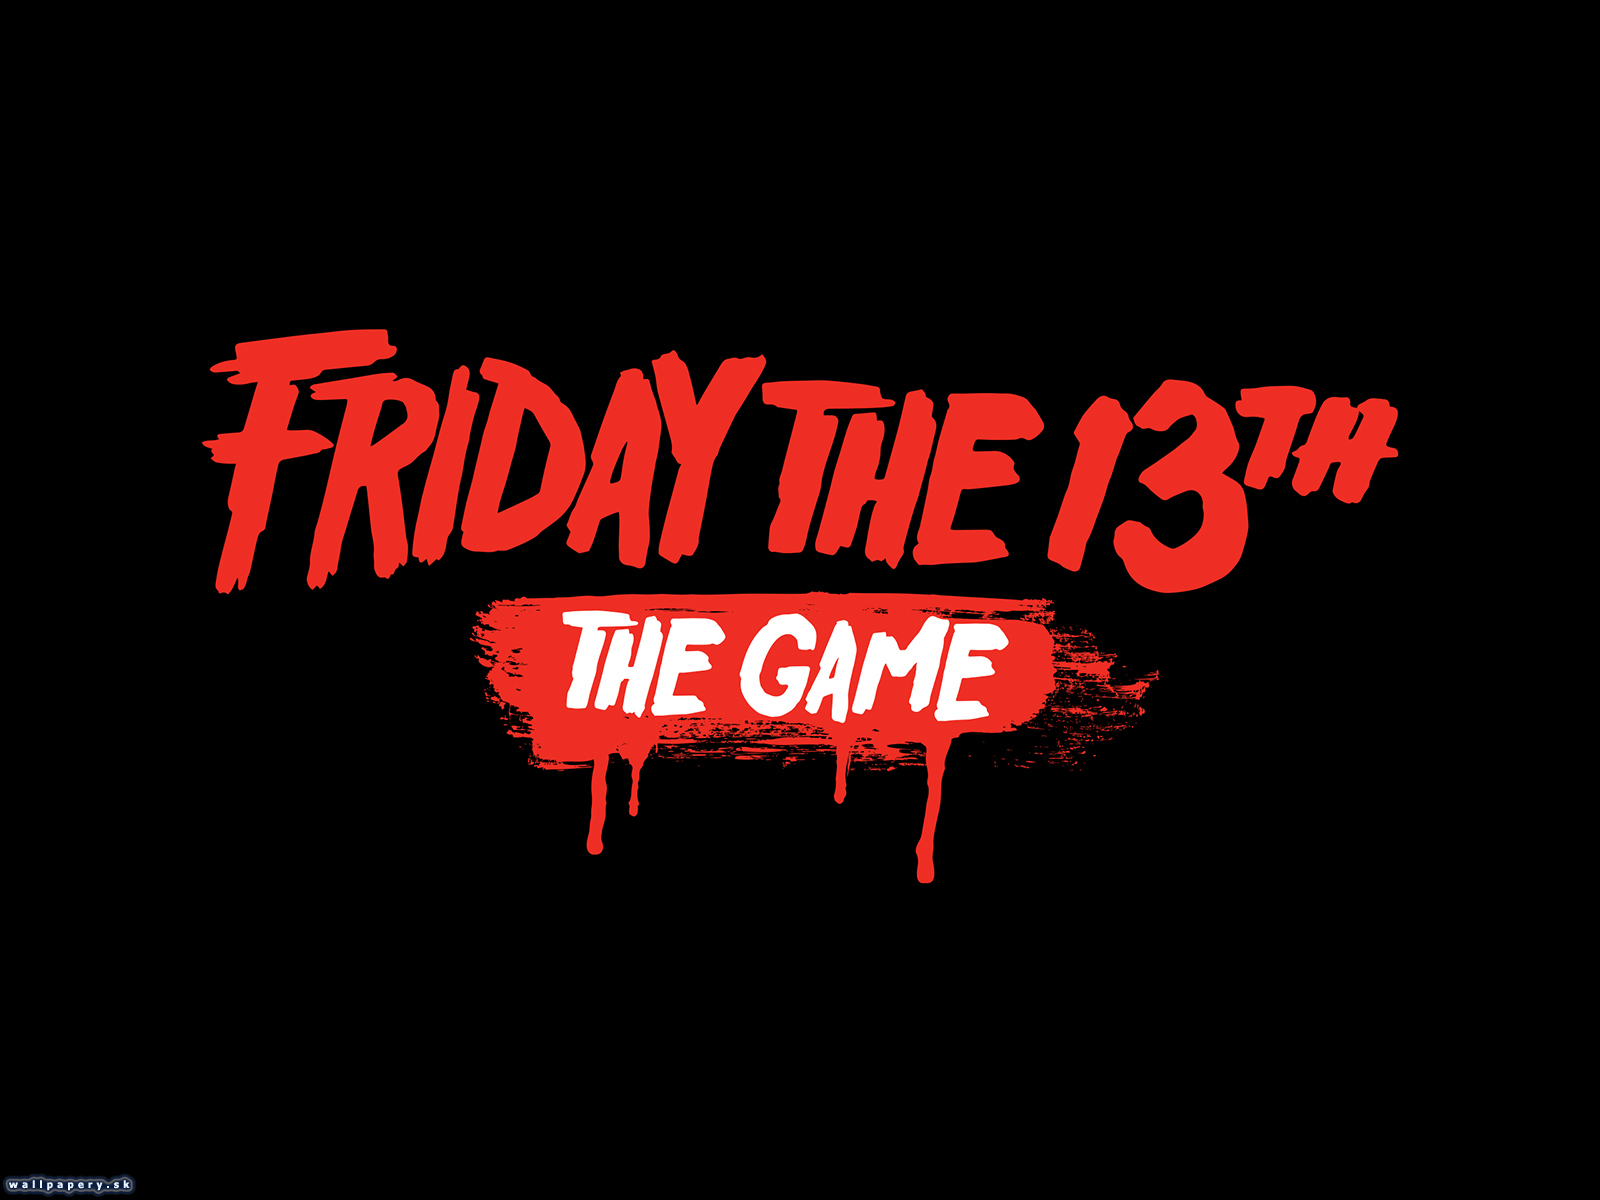 Friday the 13th: The Game - wallpaper 2